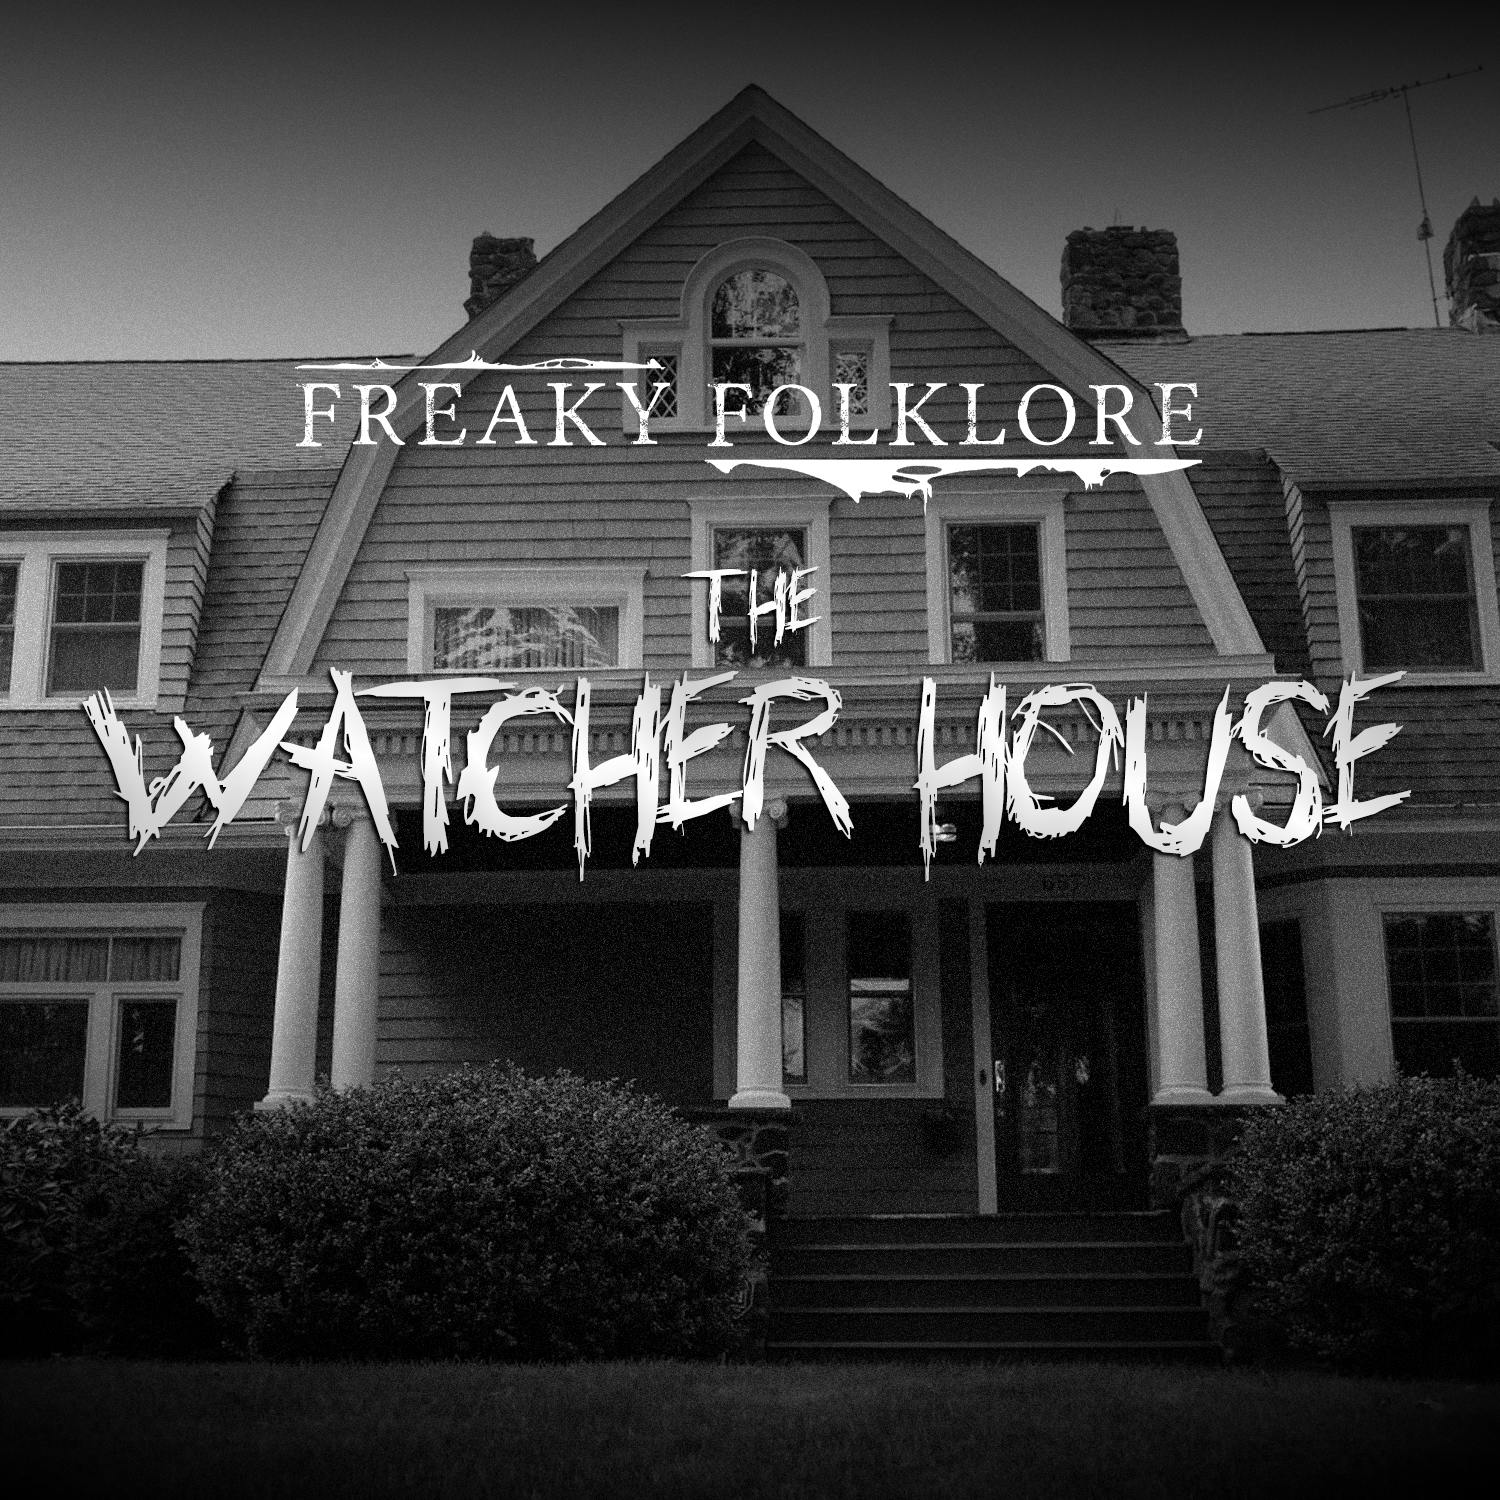 The Watcher House on 657 Boulevard (Unsolved Mysteries)